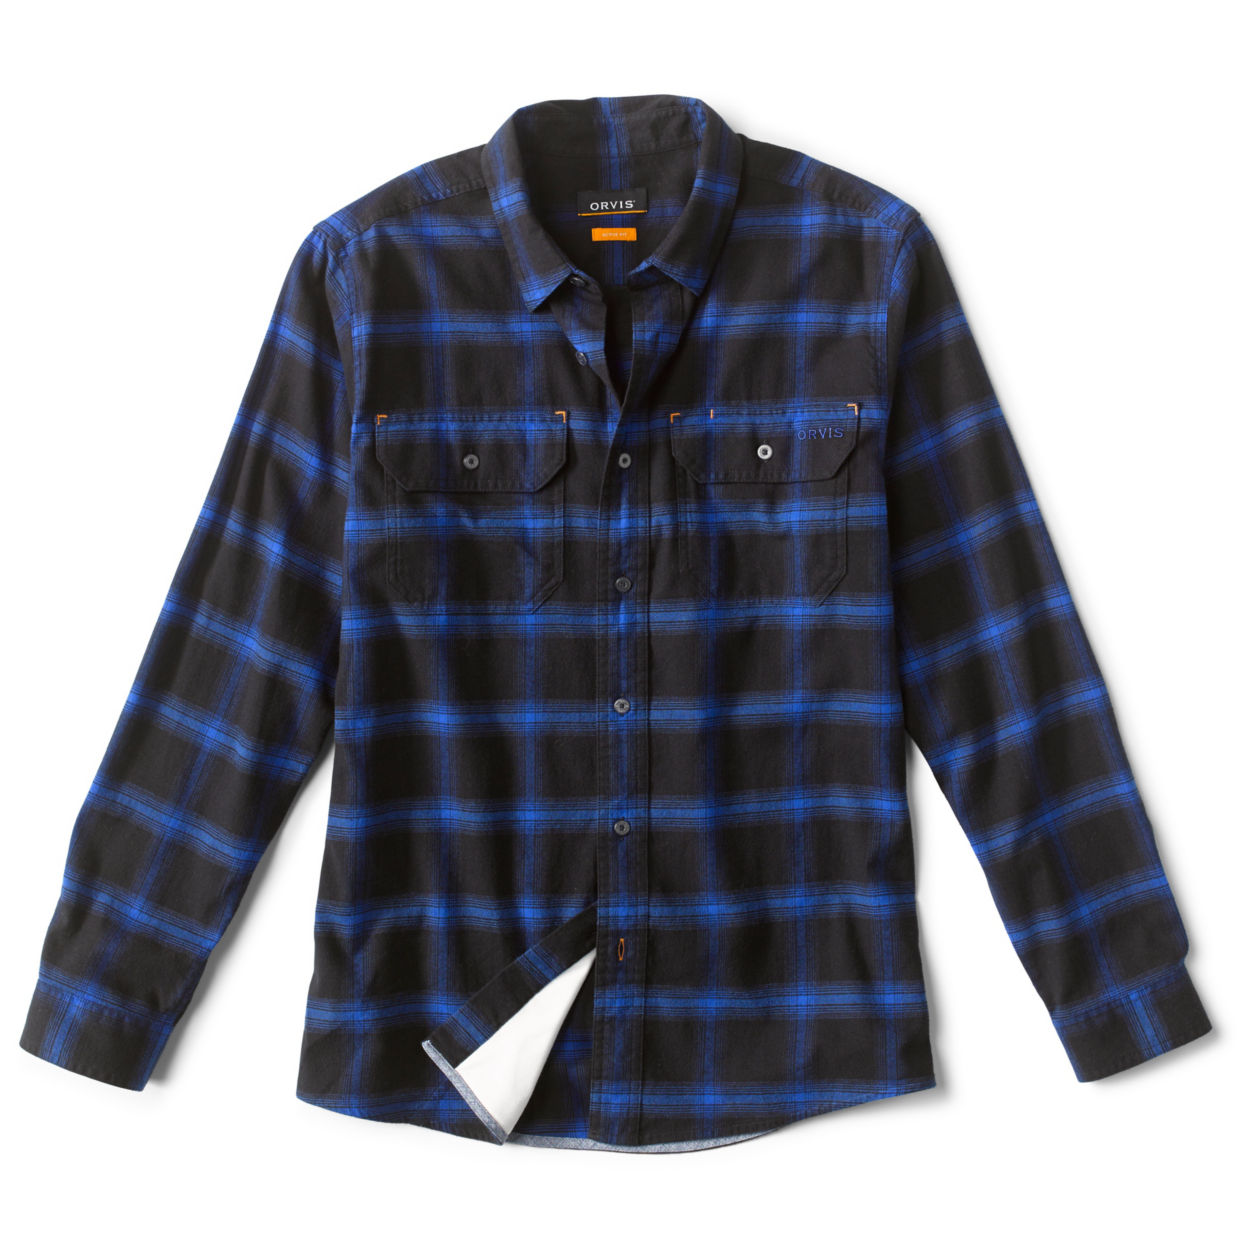 Men's Flat Creek Eco-Friendly Tech Flannel Shirt True Blue/Black Size Small Cotton/Polyester/Recycled Materials/Flannel Orvis